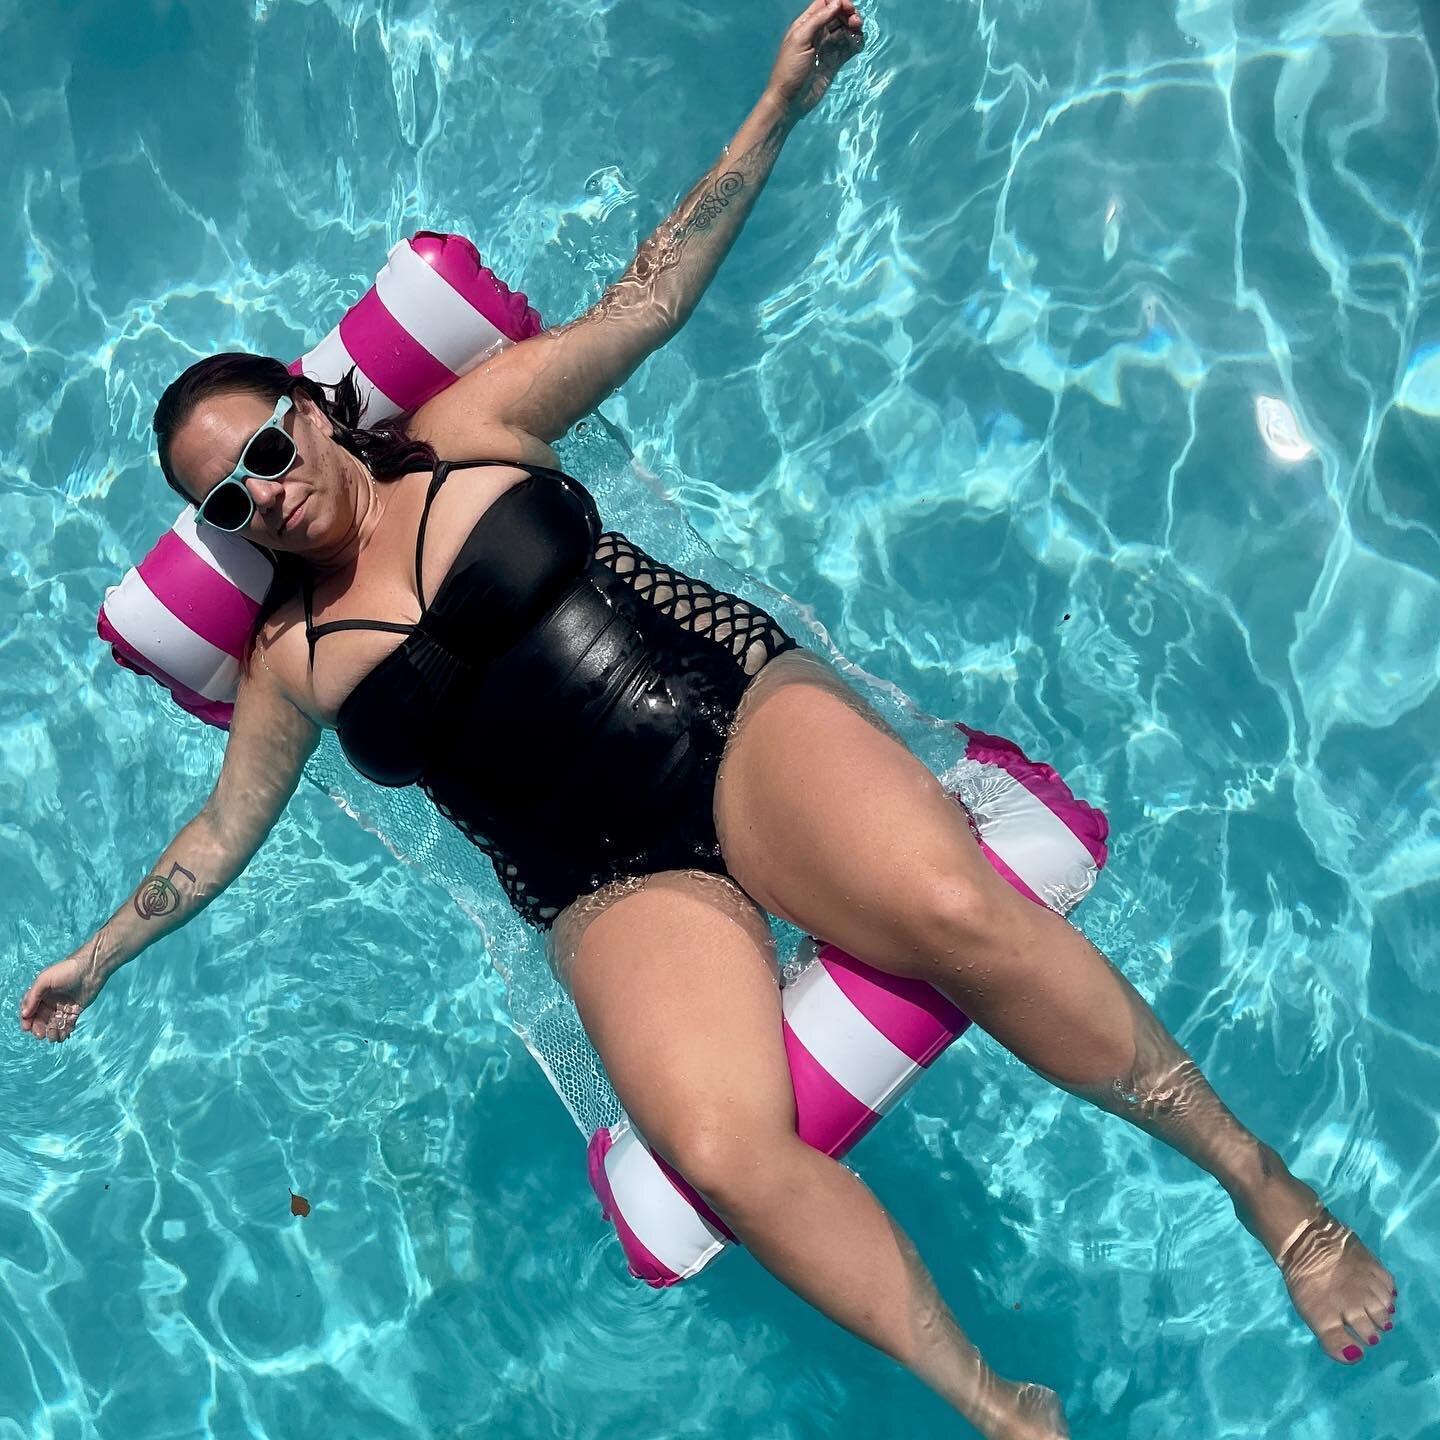 New Restorative Yoga Pose. Pool Savasana. This is revolutionary. Only 1 prop required - a raft. 

Invite me to your pool&hellip; I&rsquo;ll share my wisdom 😂 🏊&zwj;♀️ 👙 

📸 @l.wxnnings 
.
.
.
#rest #restisrevolutionary #deeprelaxation #innerwork 